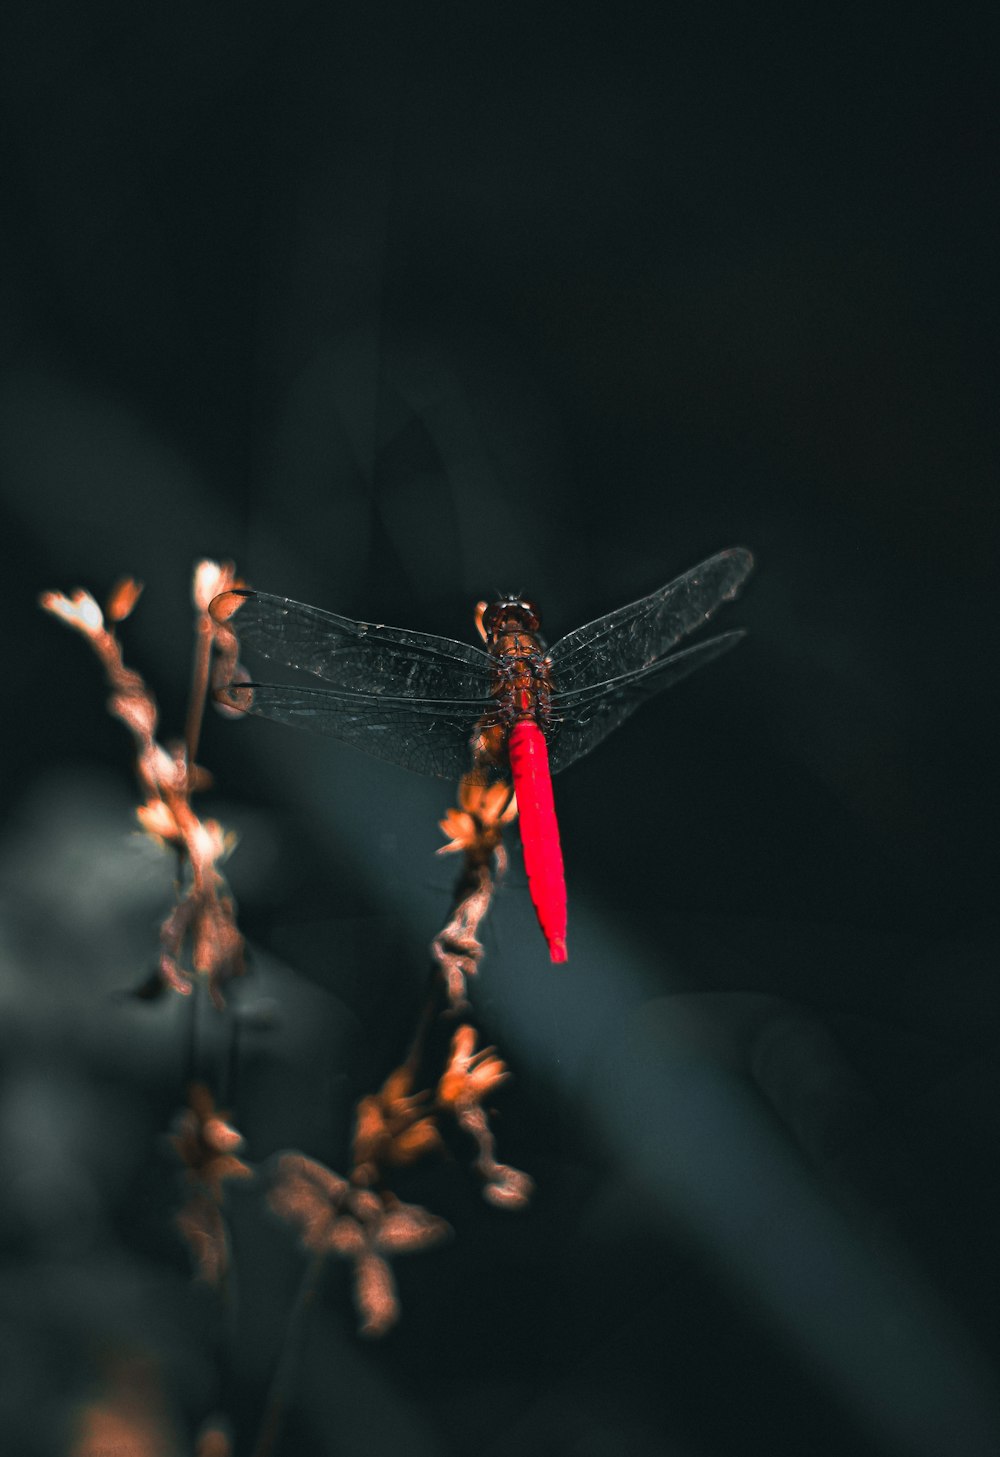 a red dragonfly sitting on top of a plant